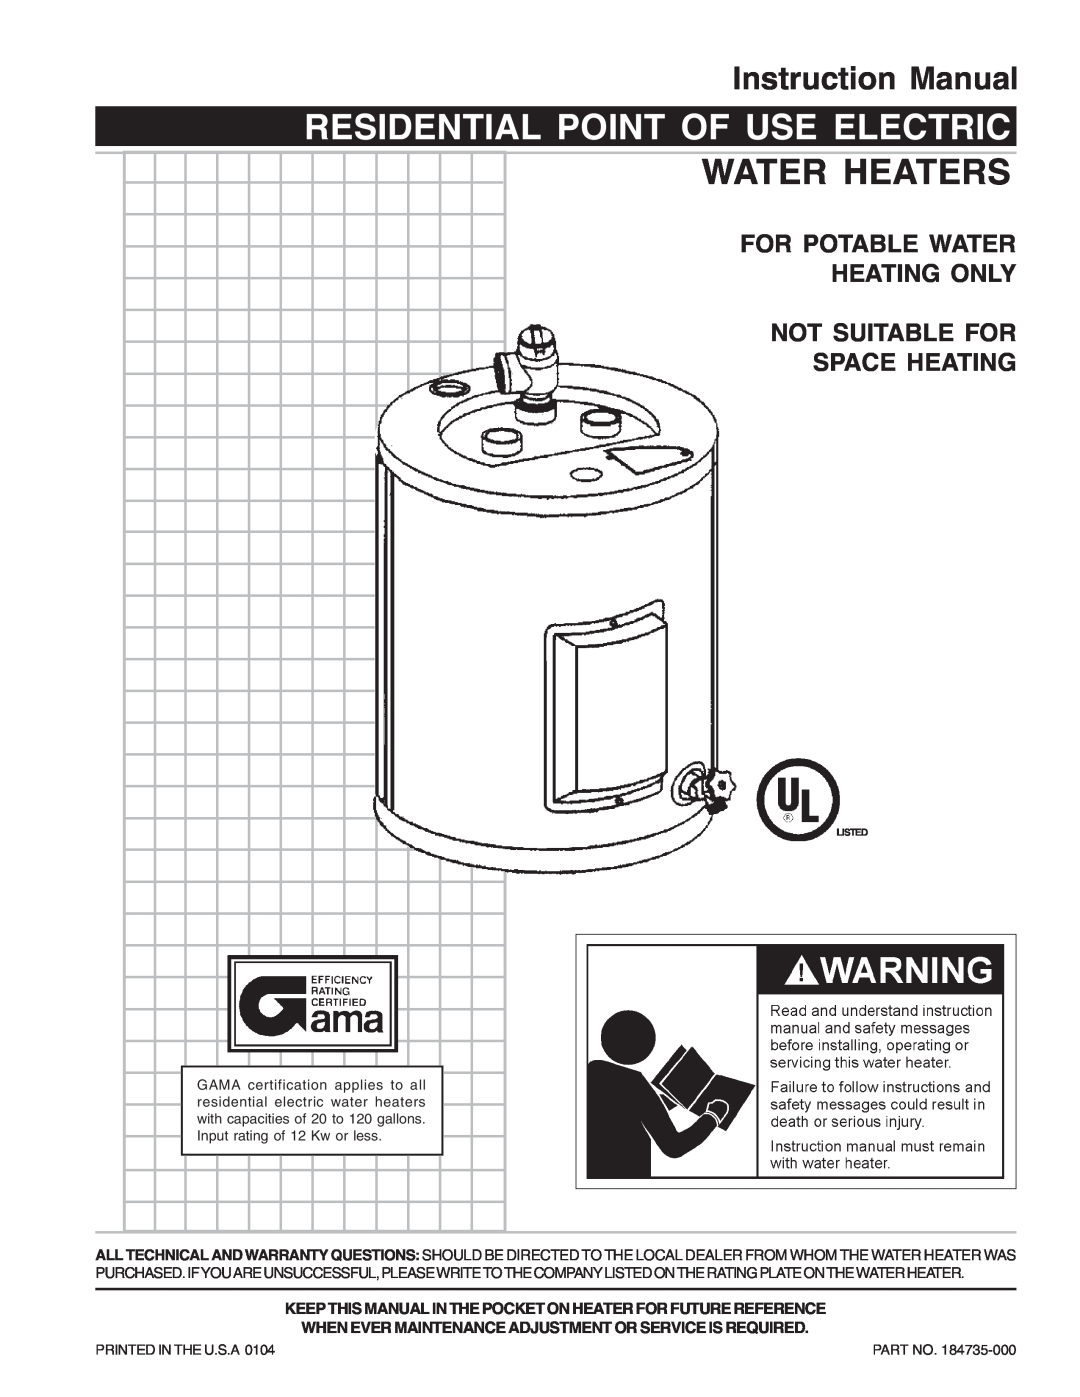 Reliance Water Heaters 184735-000 instruction manual Residential Point Of Use Electric, Water Heaters, Space Heating 